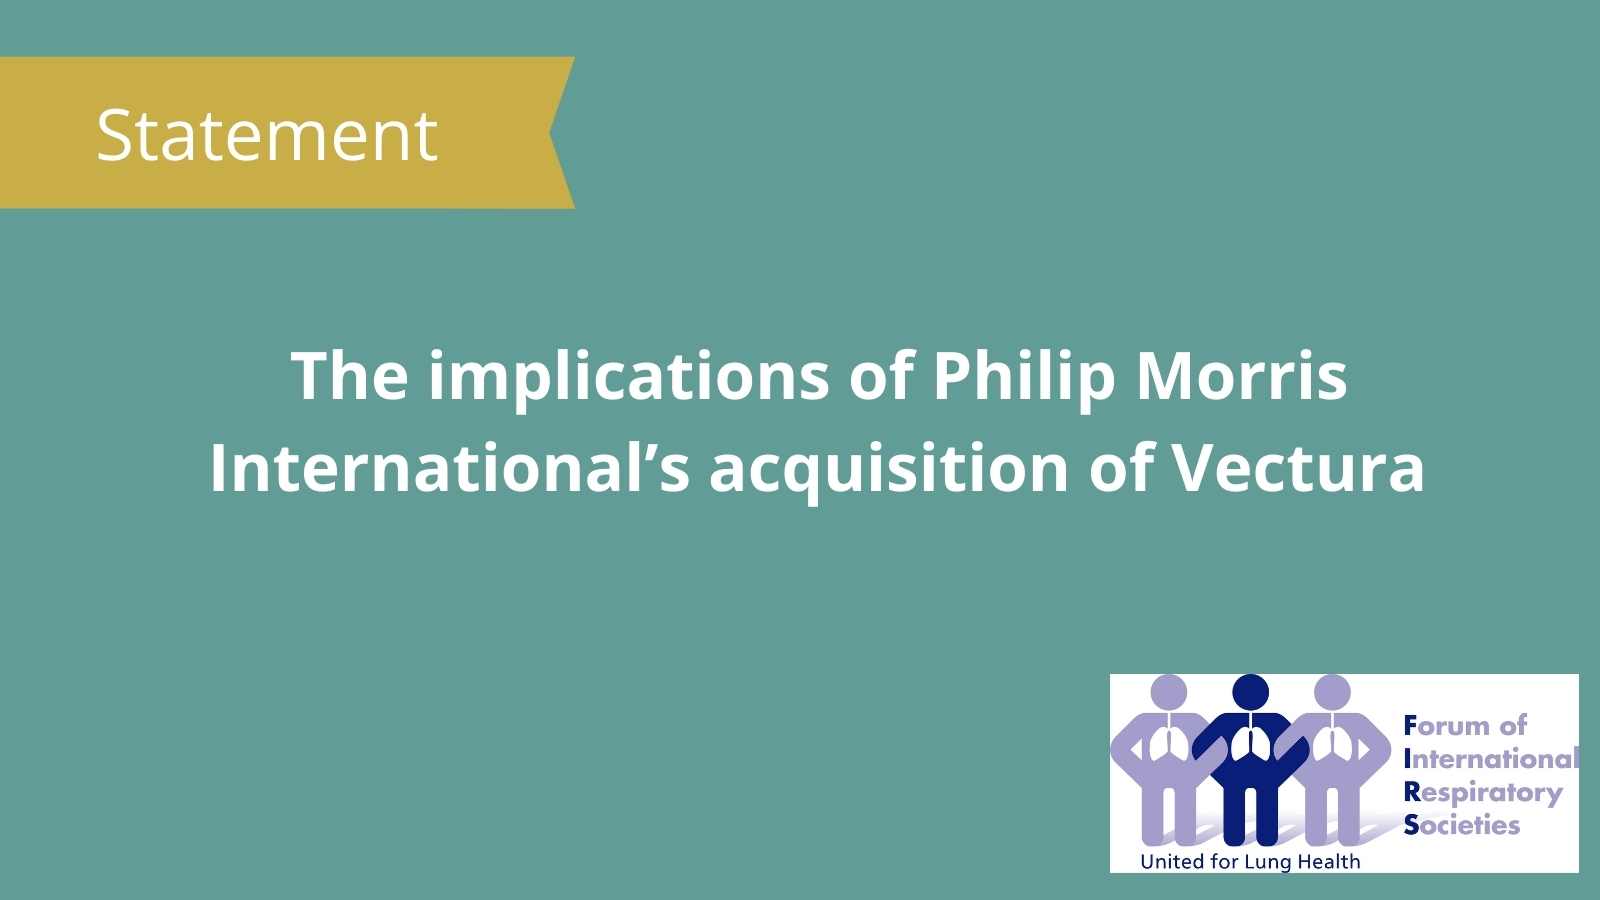 Joint statement on the implications of Philip Morris International’s acquisition of Vectura